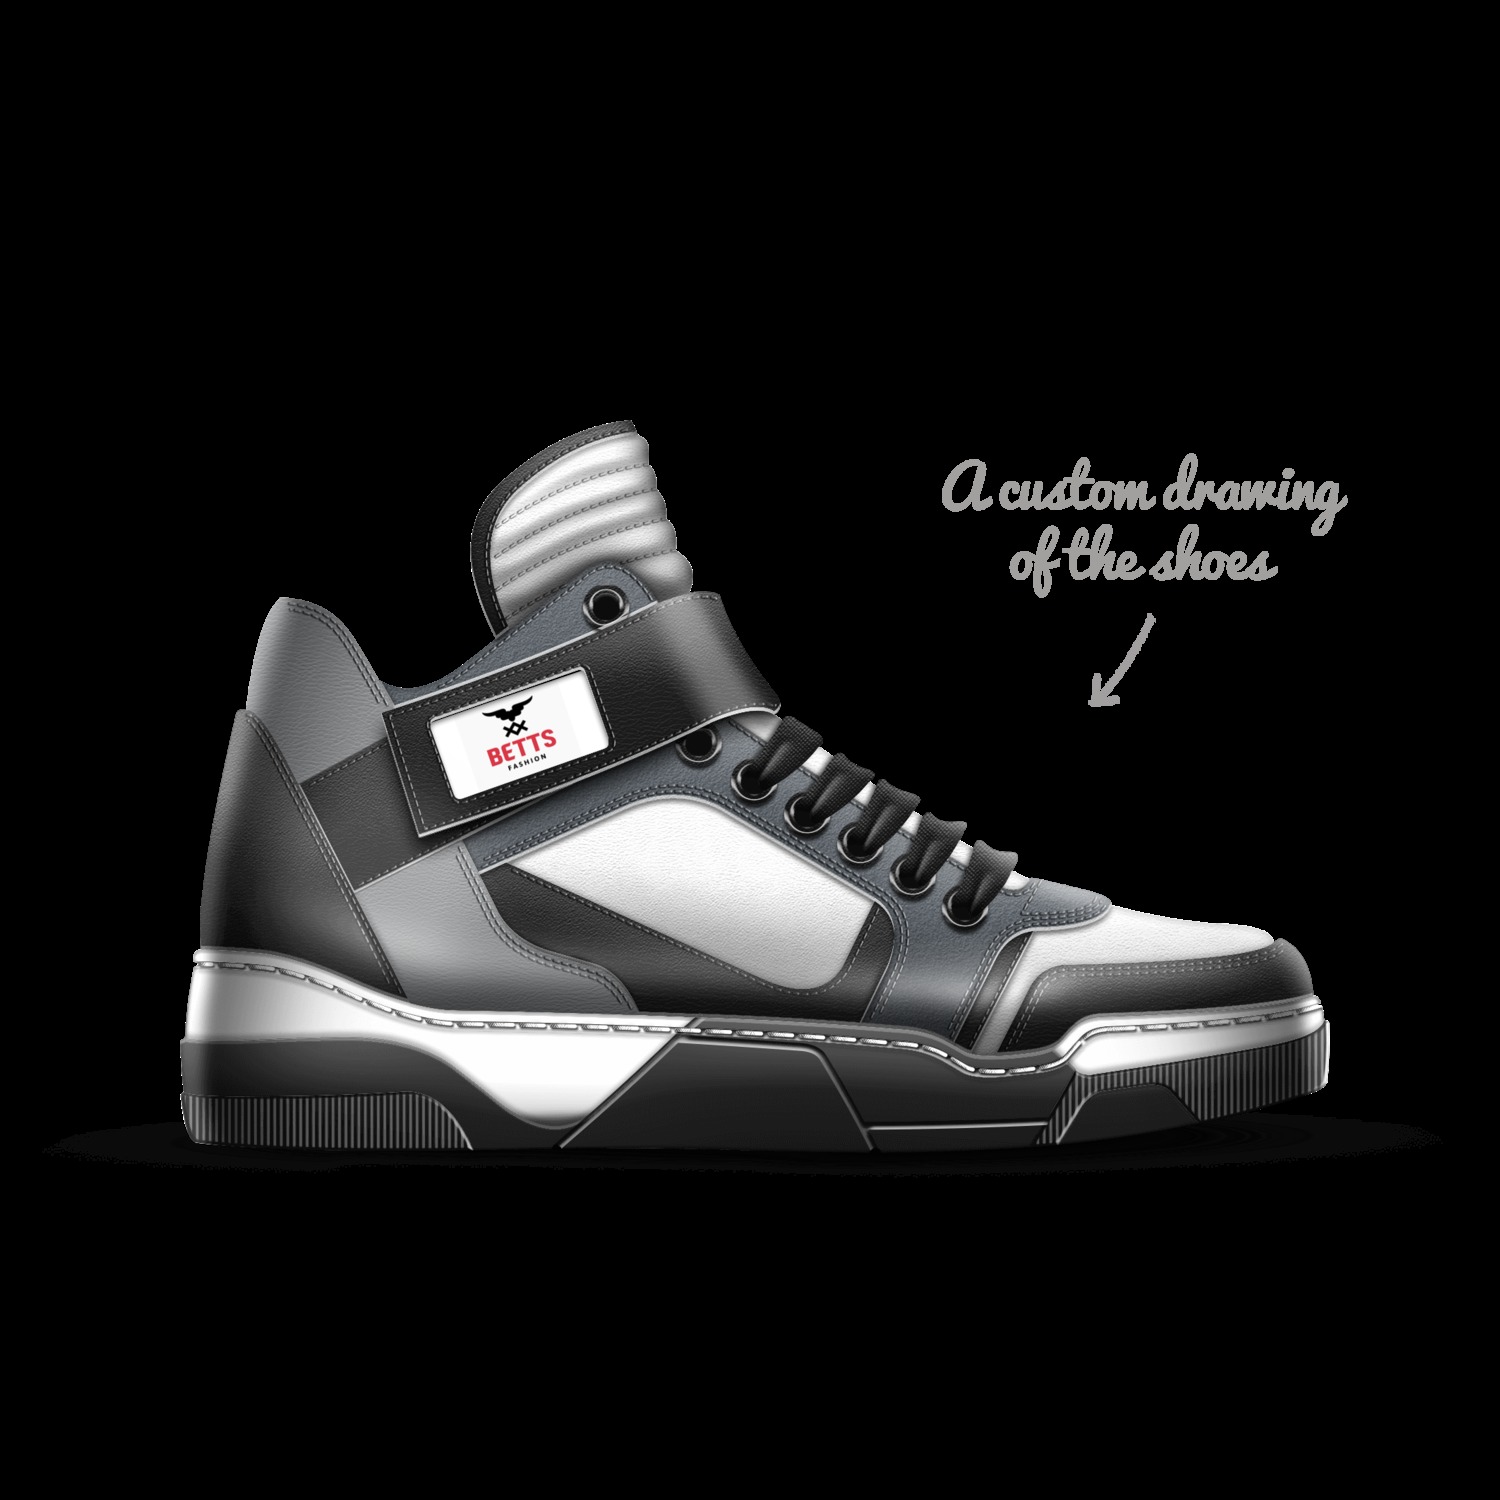 A Custom Shoe concept by Tristan Betts